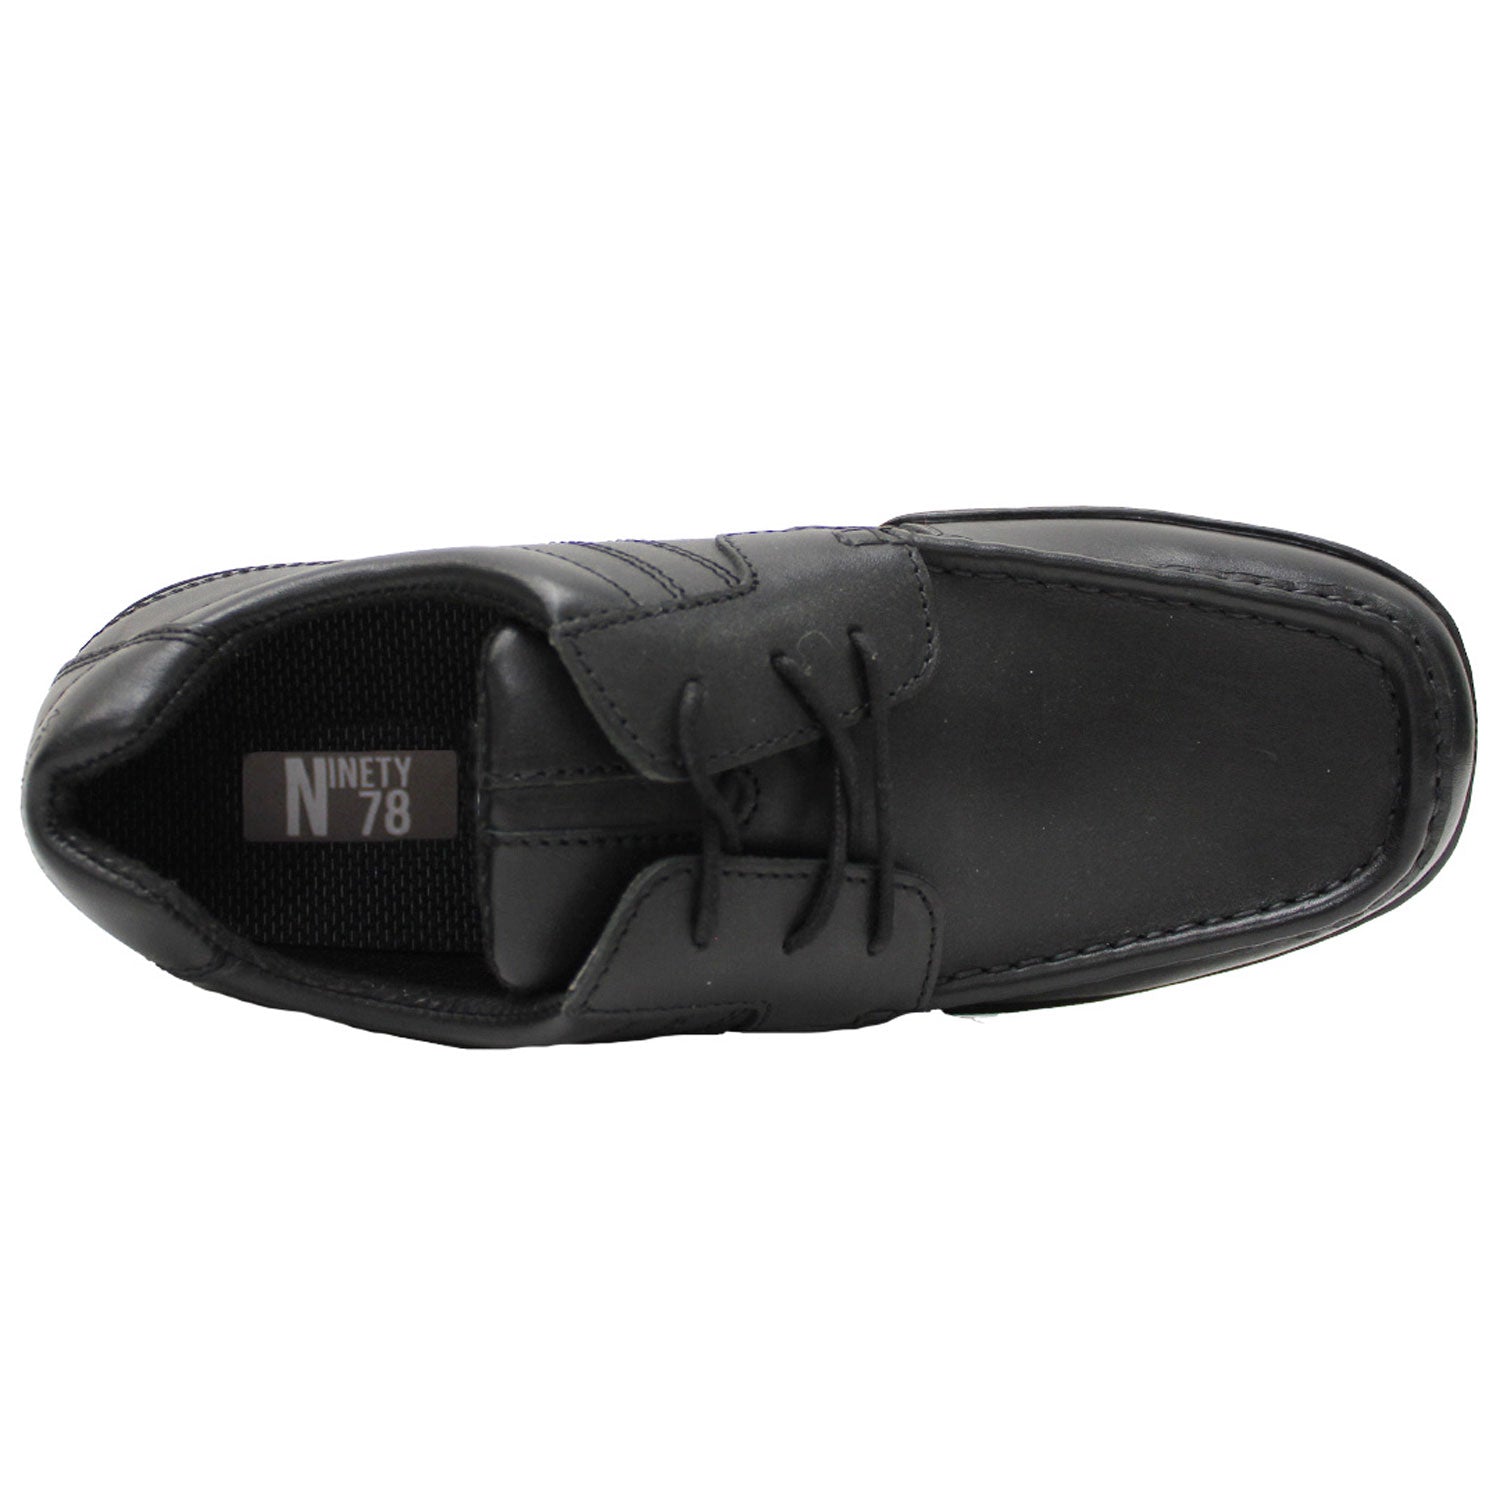 Ninety 78 Lace Up School Shoe - Black 3 Shaws Department Stores